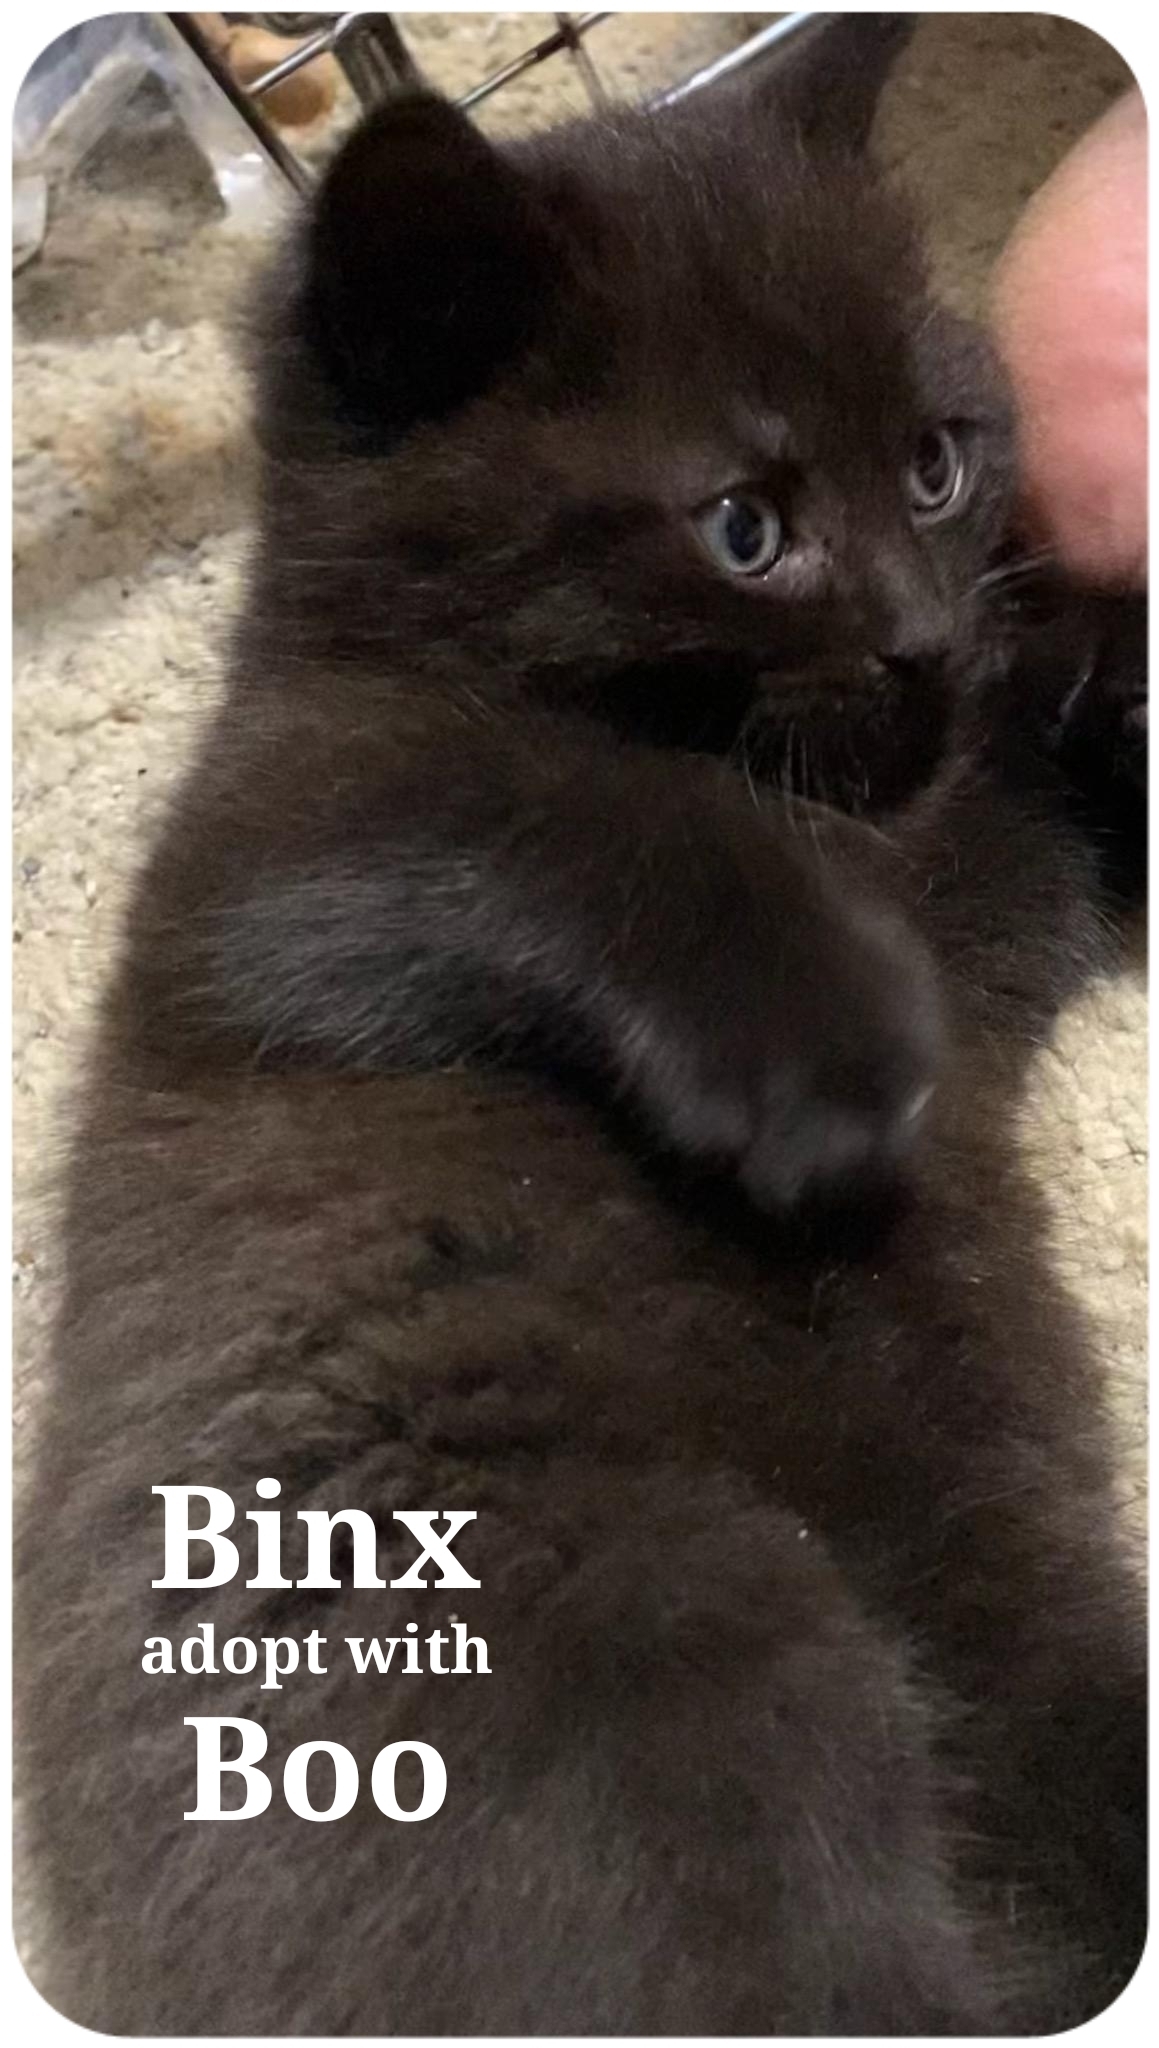 Binx And Boo detail page